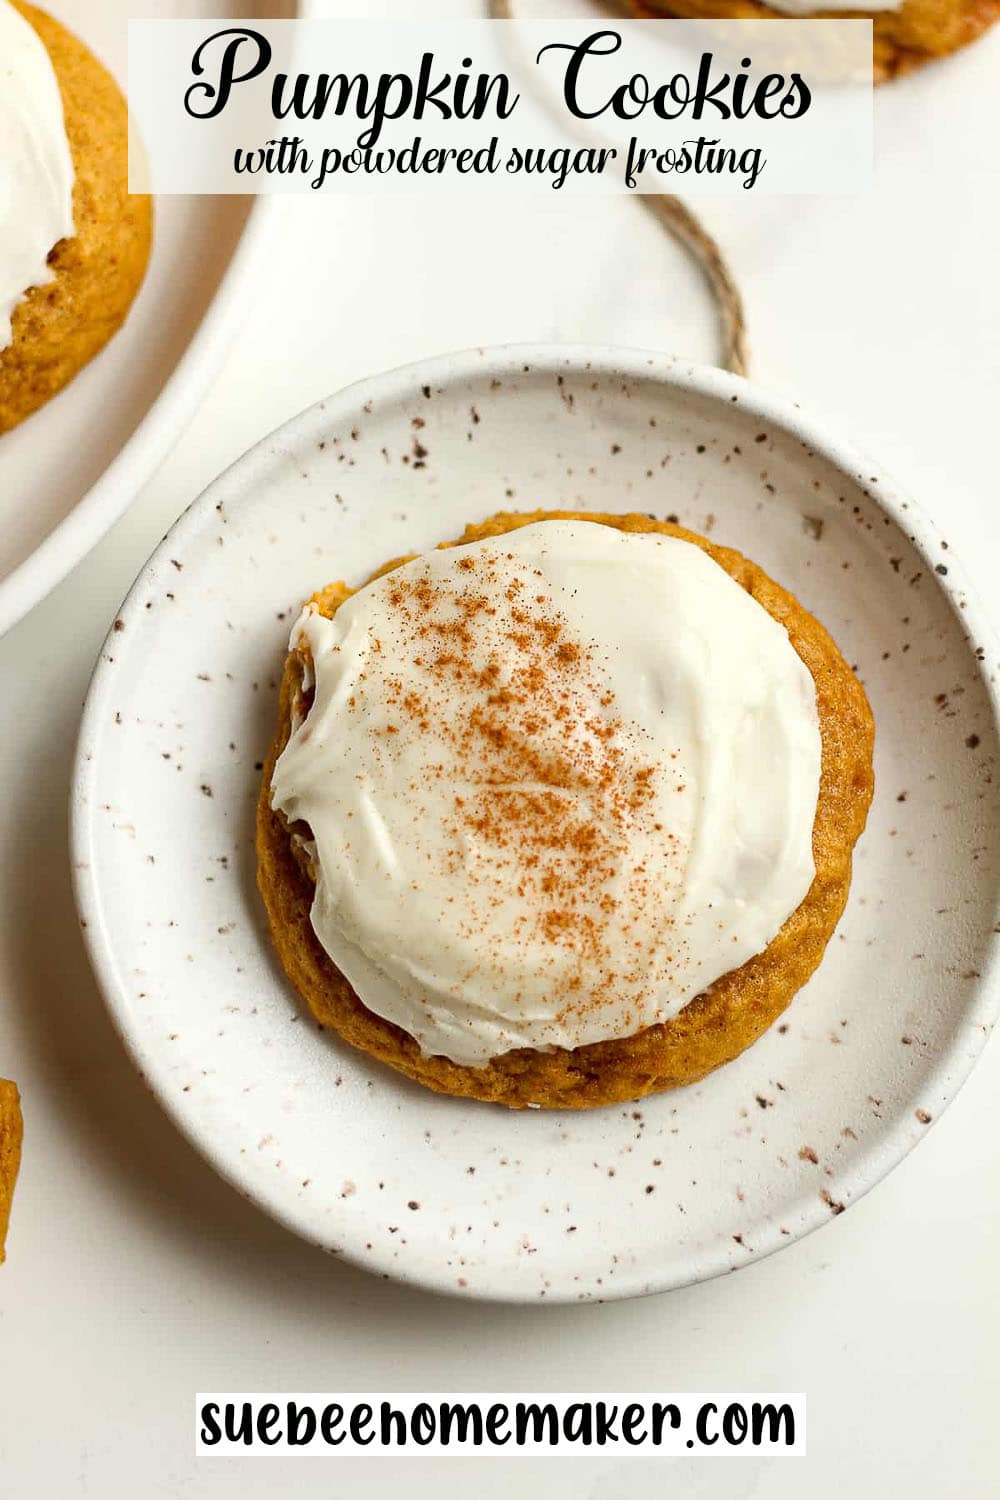 A small plate with a pumpkin cookie with powdered sugar frosting.